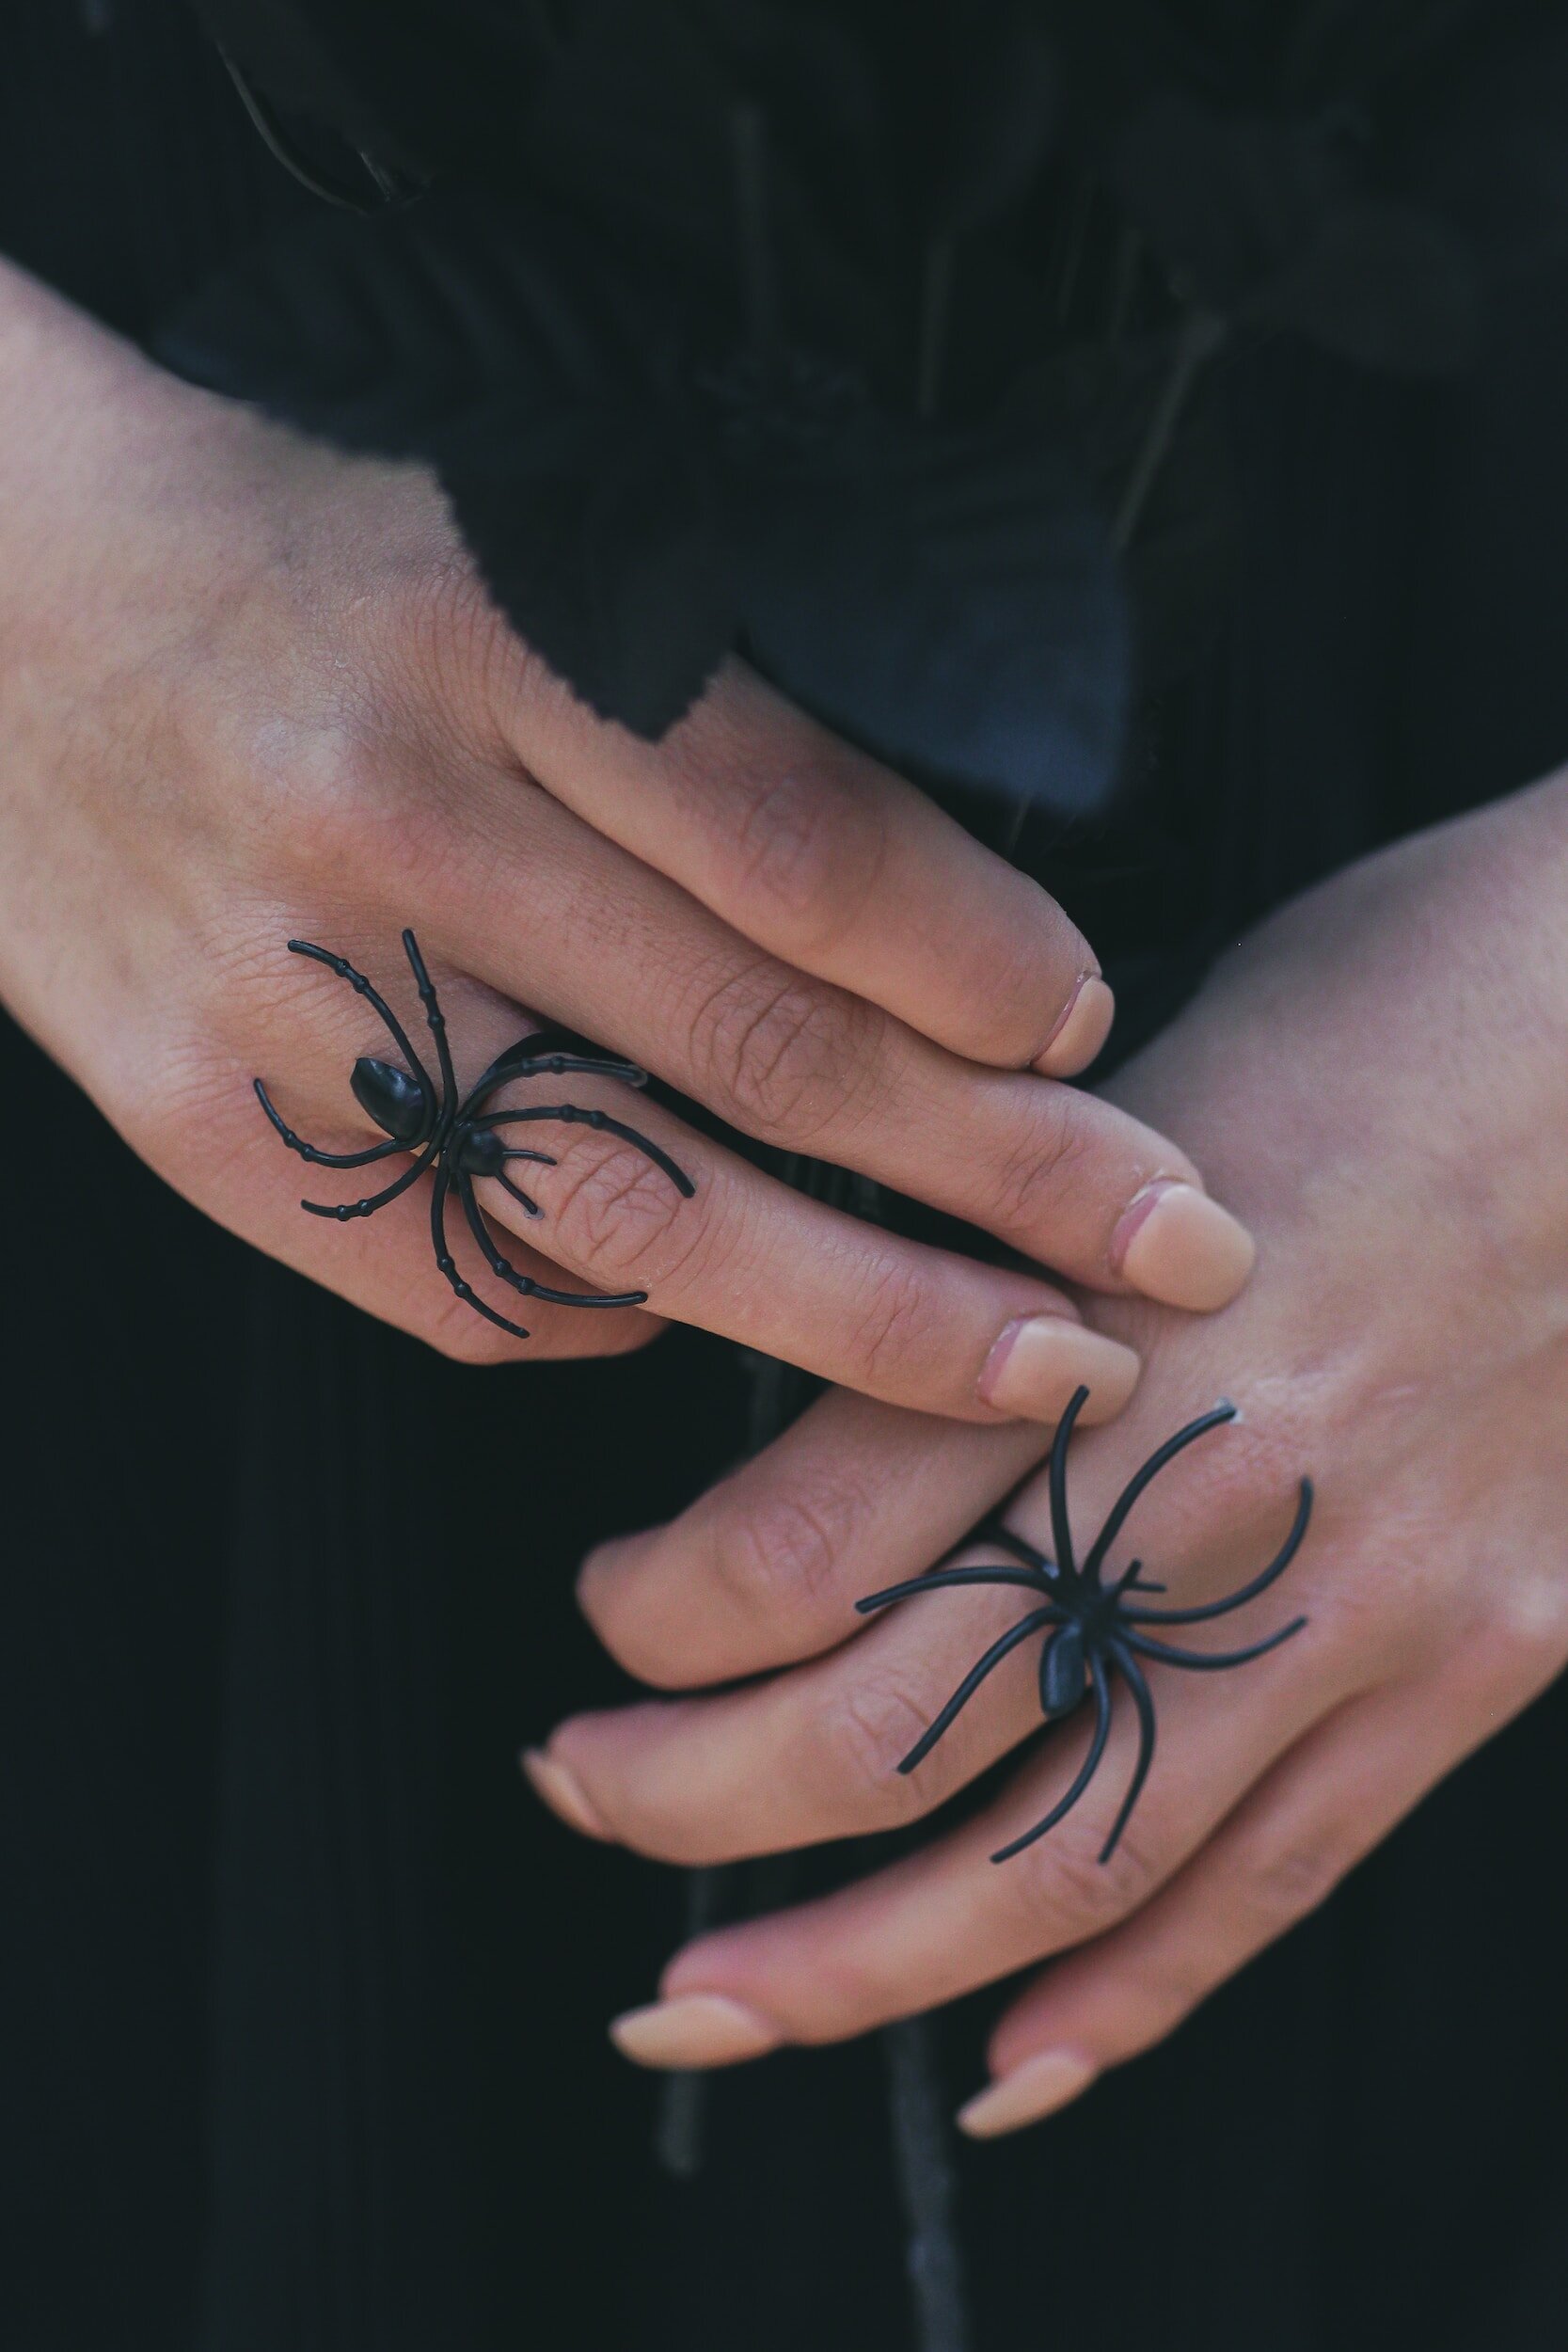 Yea let's just get a spider tattoo : r/ATBGE